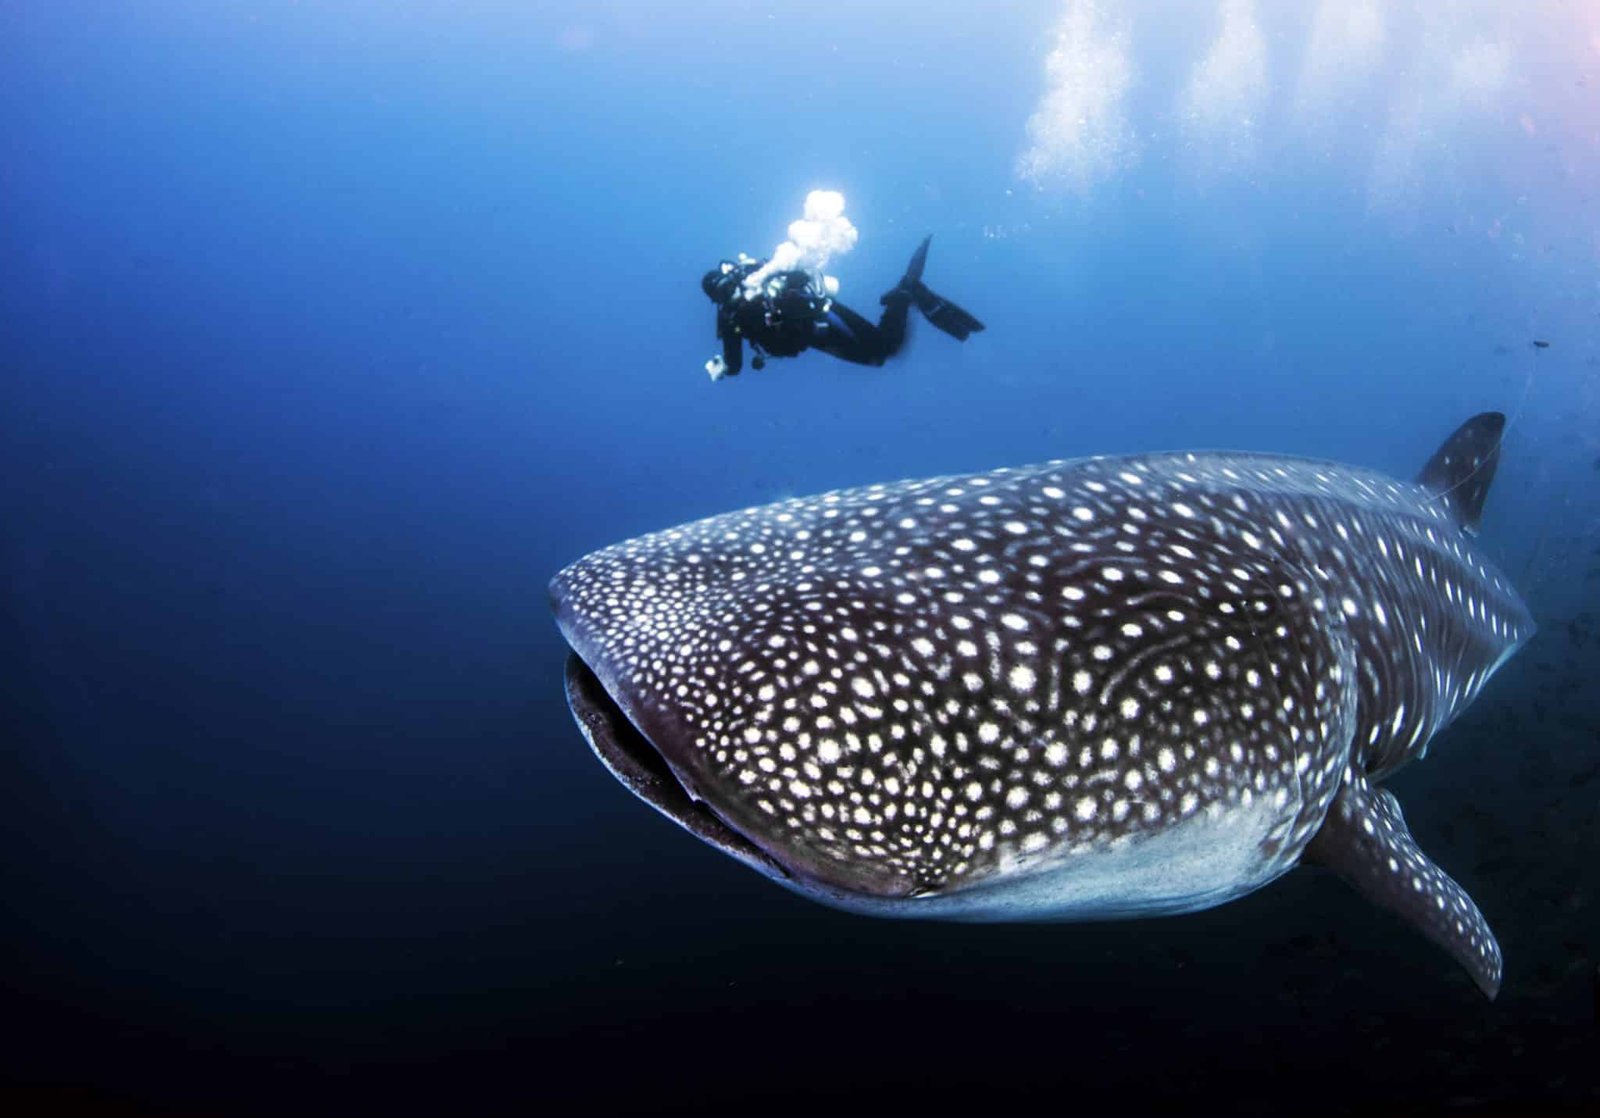 A divemaster can be used as scale to see the size of a pregnant female adult whale shark underwater